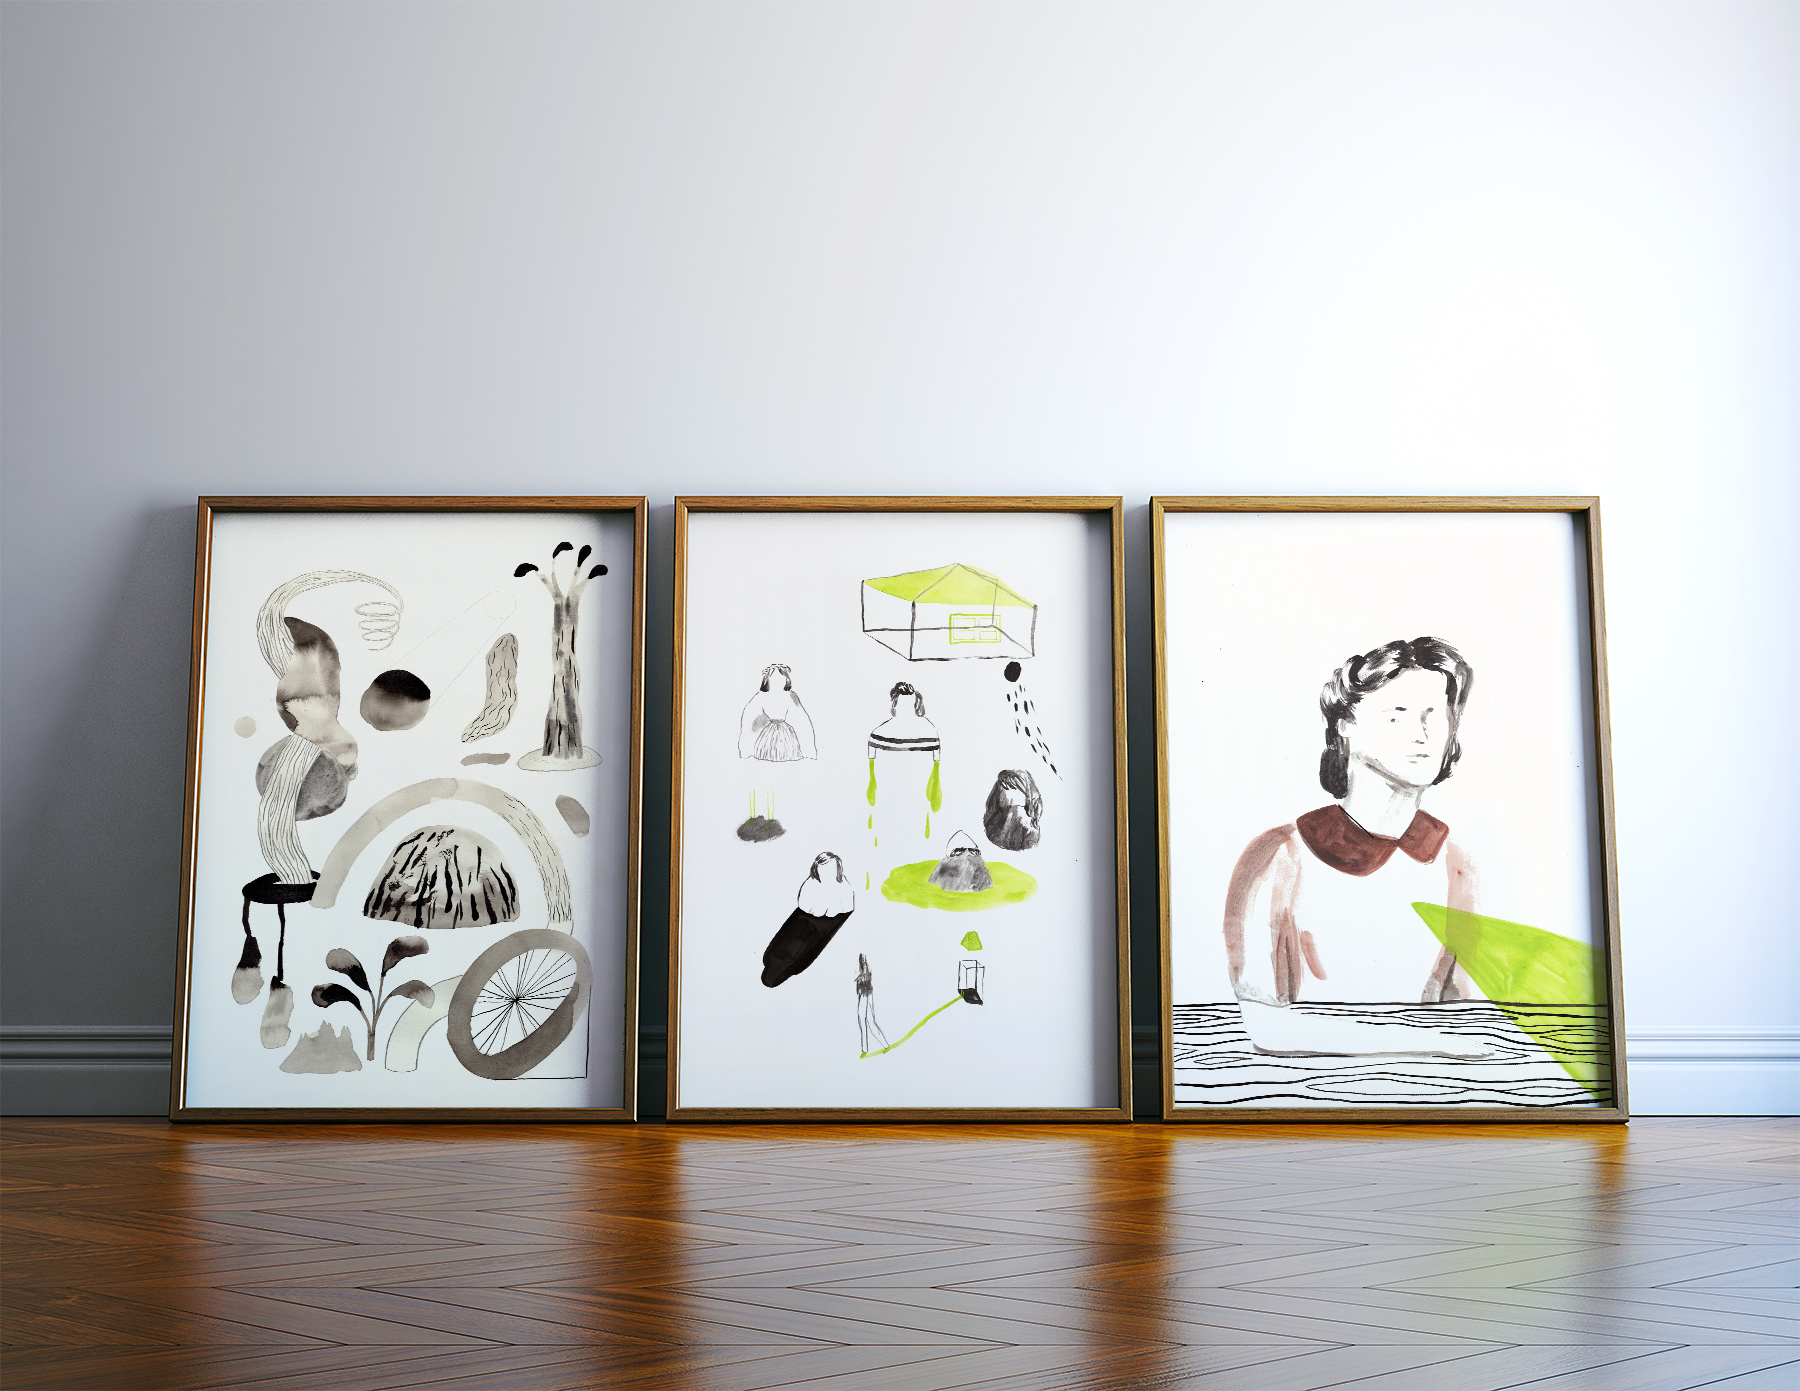 art-prints, gliceé, aesthetic, family-friendly, illustrative, portraiture, bodies, moods, people, black, green, white, ink, paper, buildings, danish, decorative, design, faces, interior, interior-design, men, nordic, scandinavien, women, Buy original high quality art. Paintings, drawings, limited edition prints & posters by talented artists.